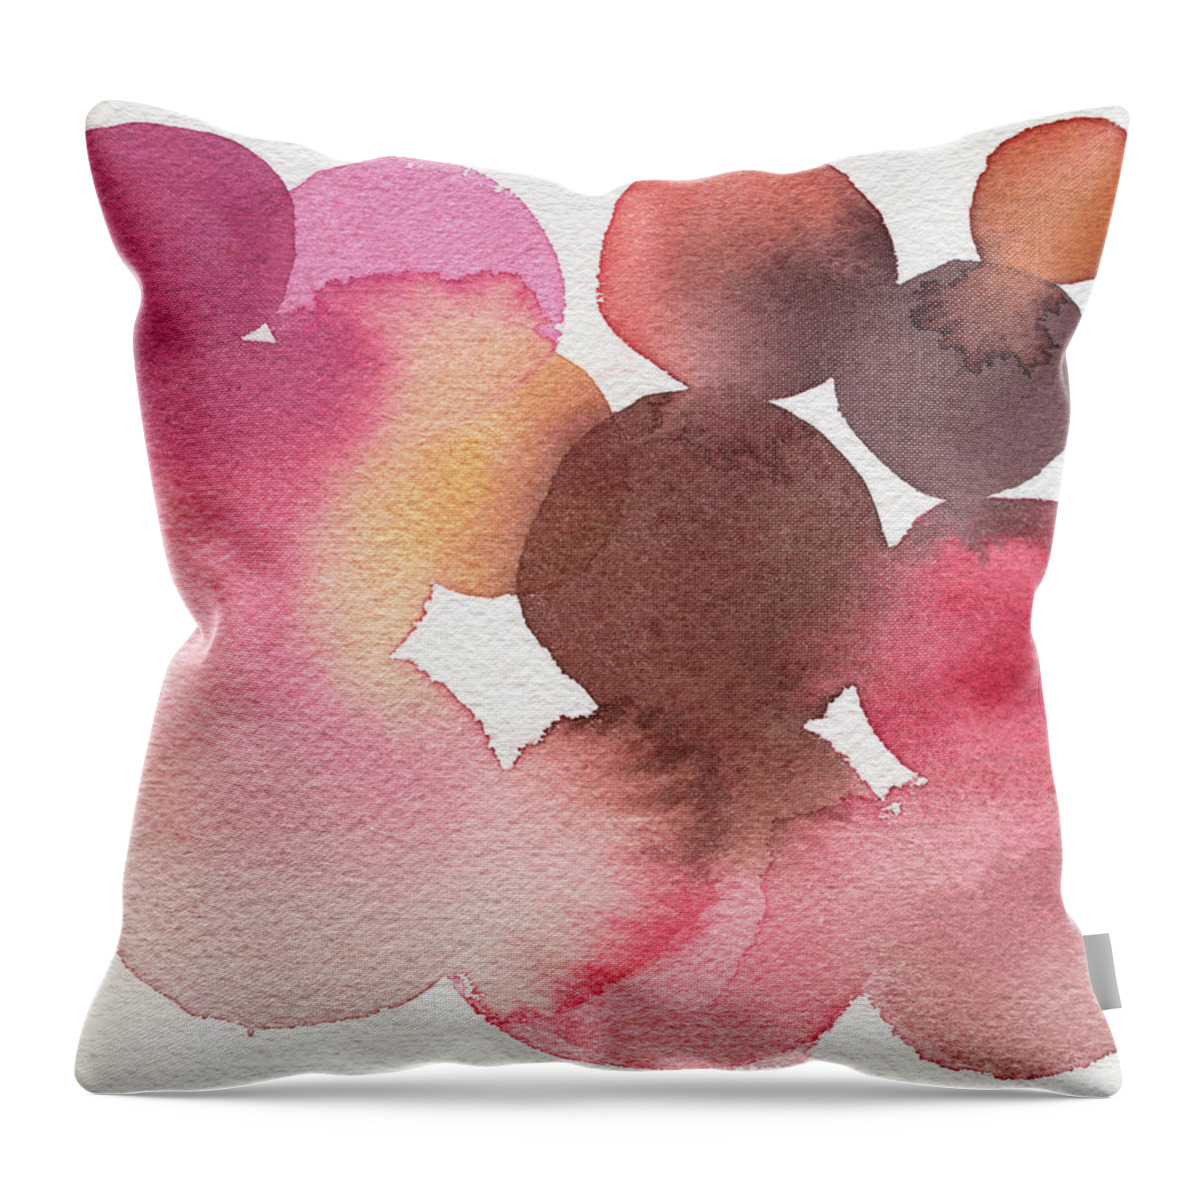 Pink Throw Pillow featuring the painting Pink Brown Coral Abstract Watercolor by Beverly Brown